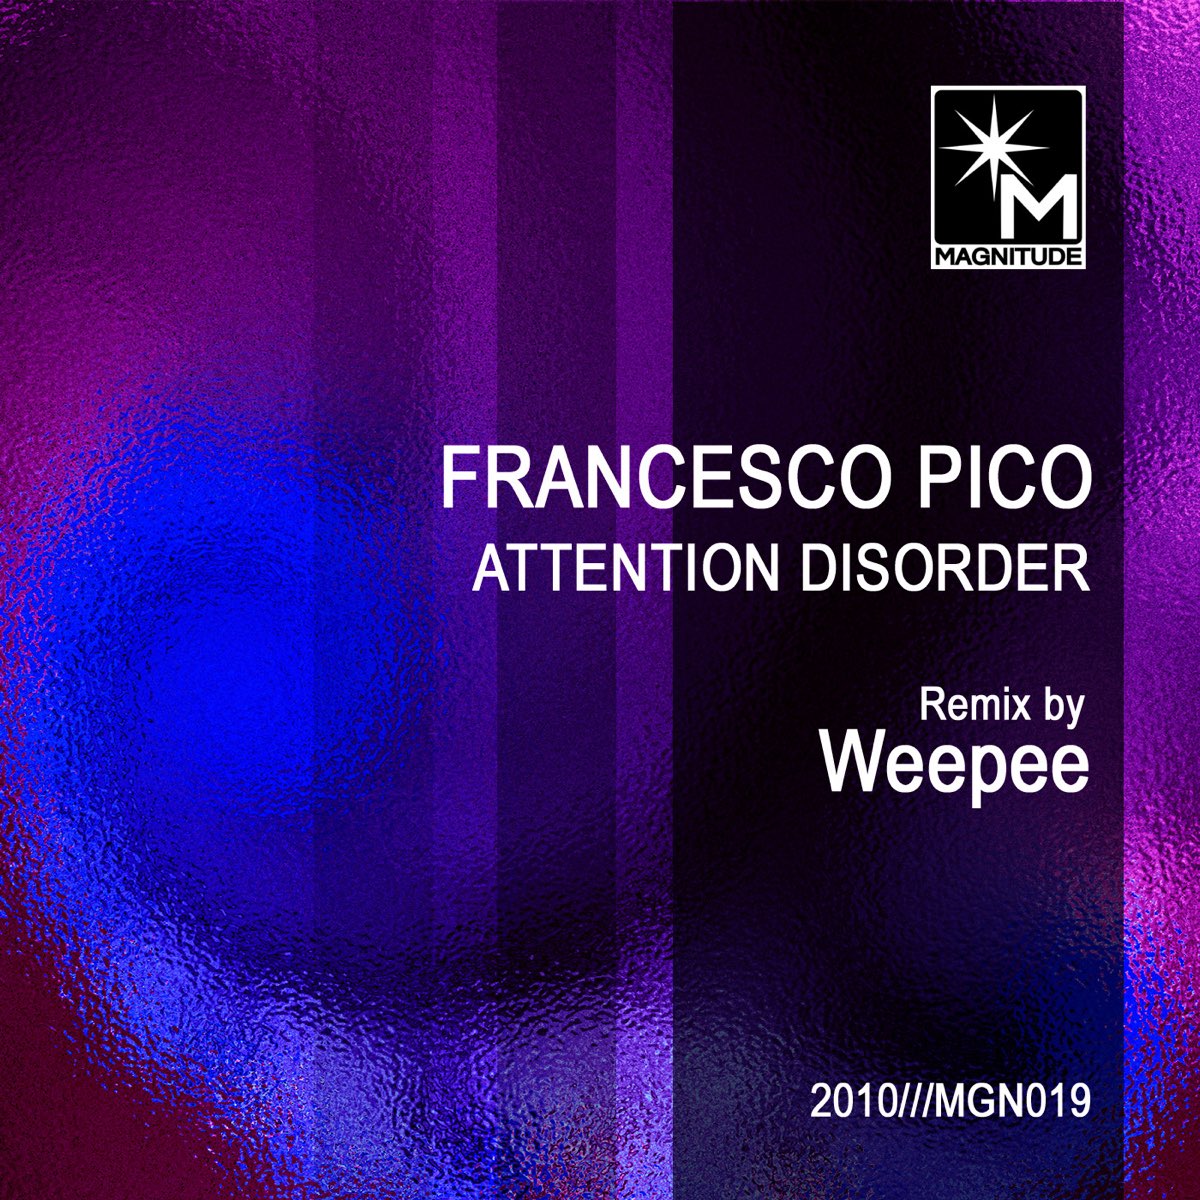 Francesco Pico. Disorder "Singles collection". Attention disorders